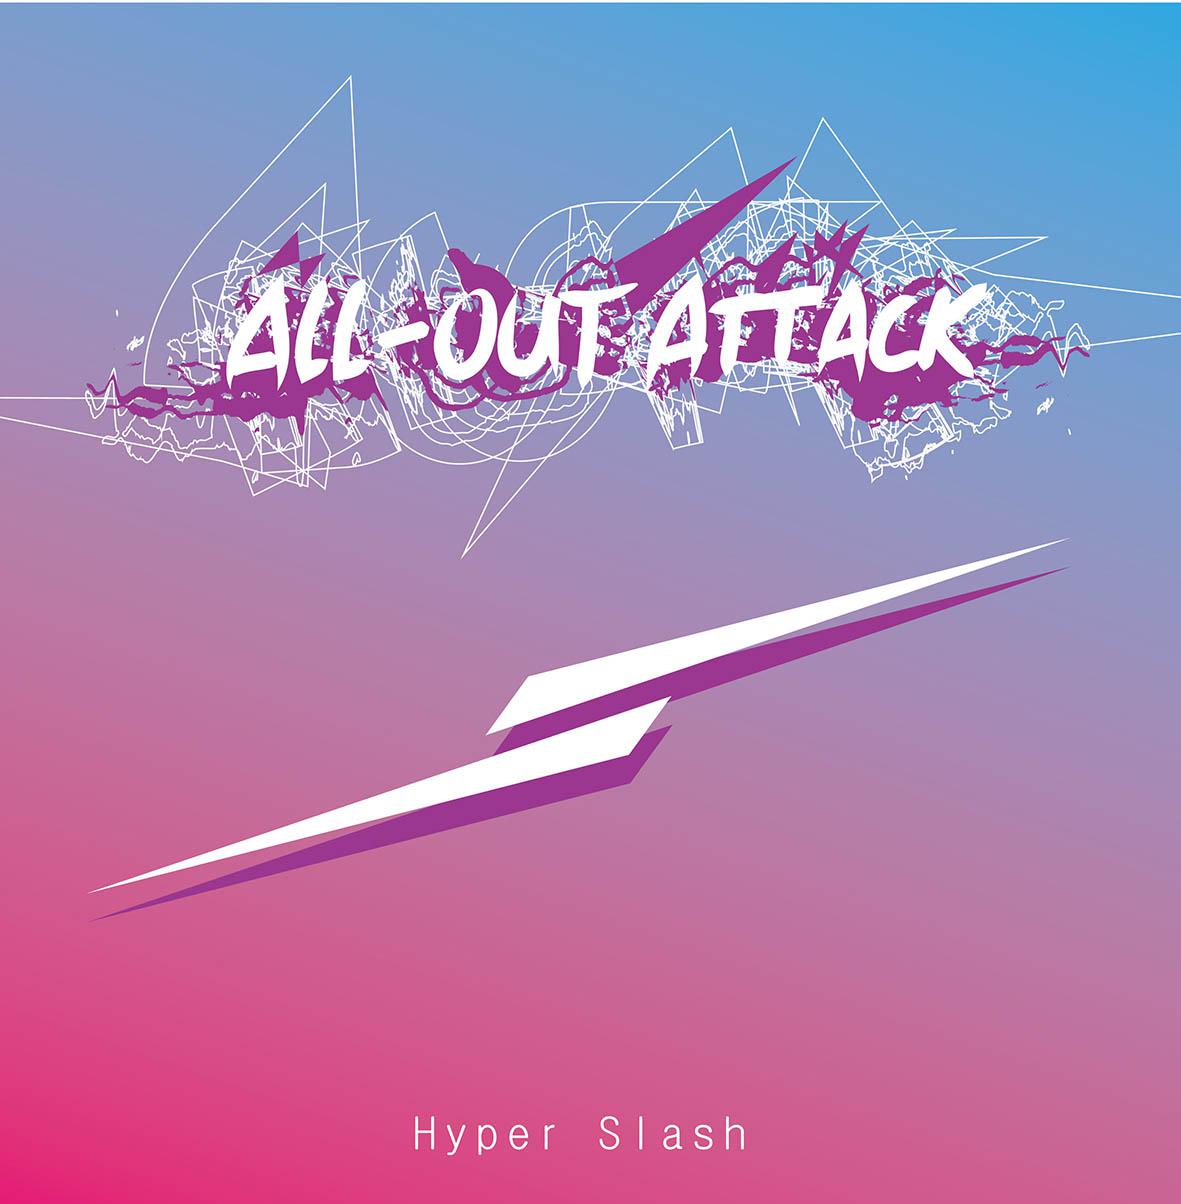 ALL-OUT ATTACK专辑